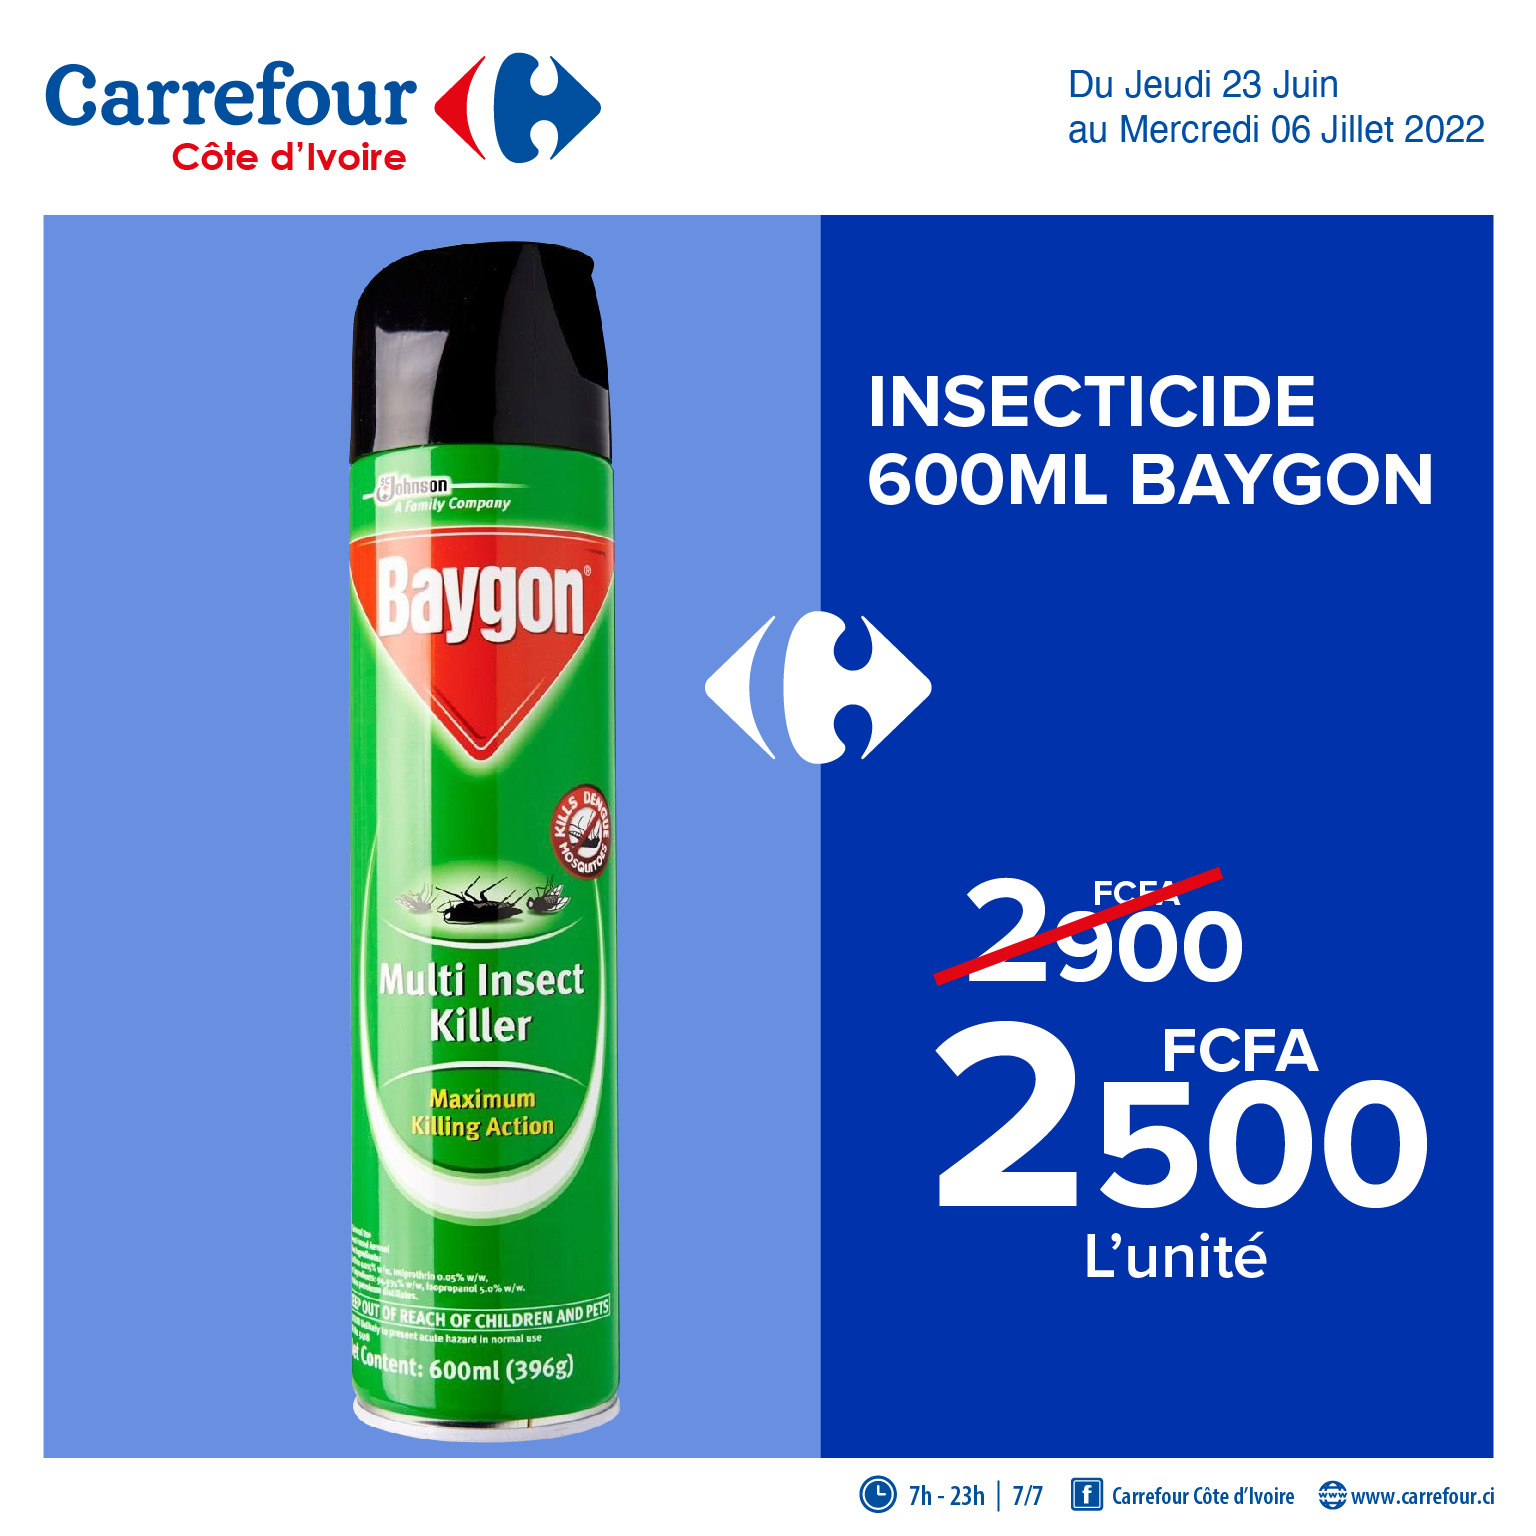 INSECTICIDE 600ML BAYGON